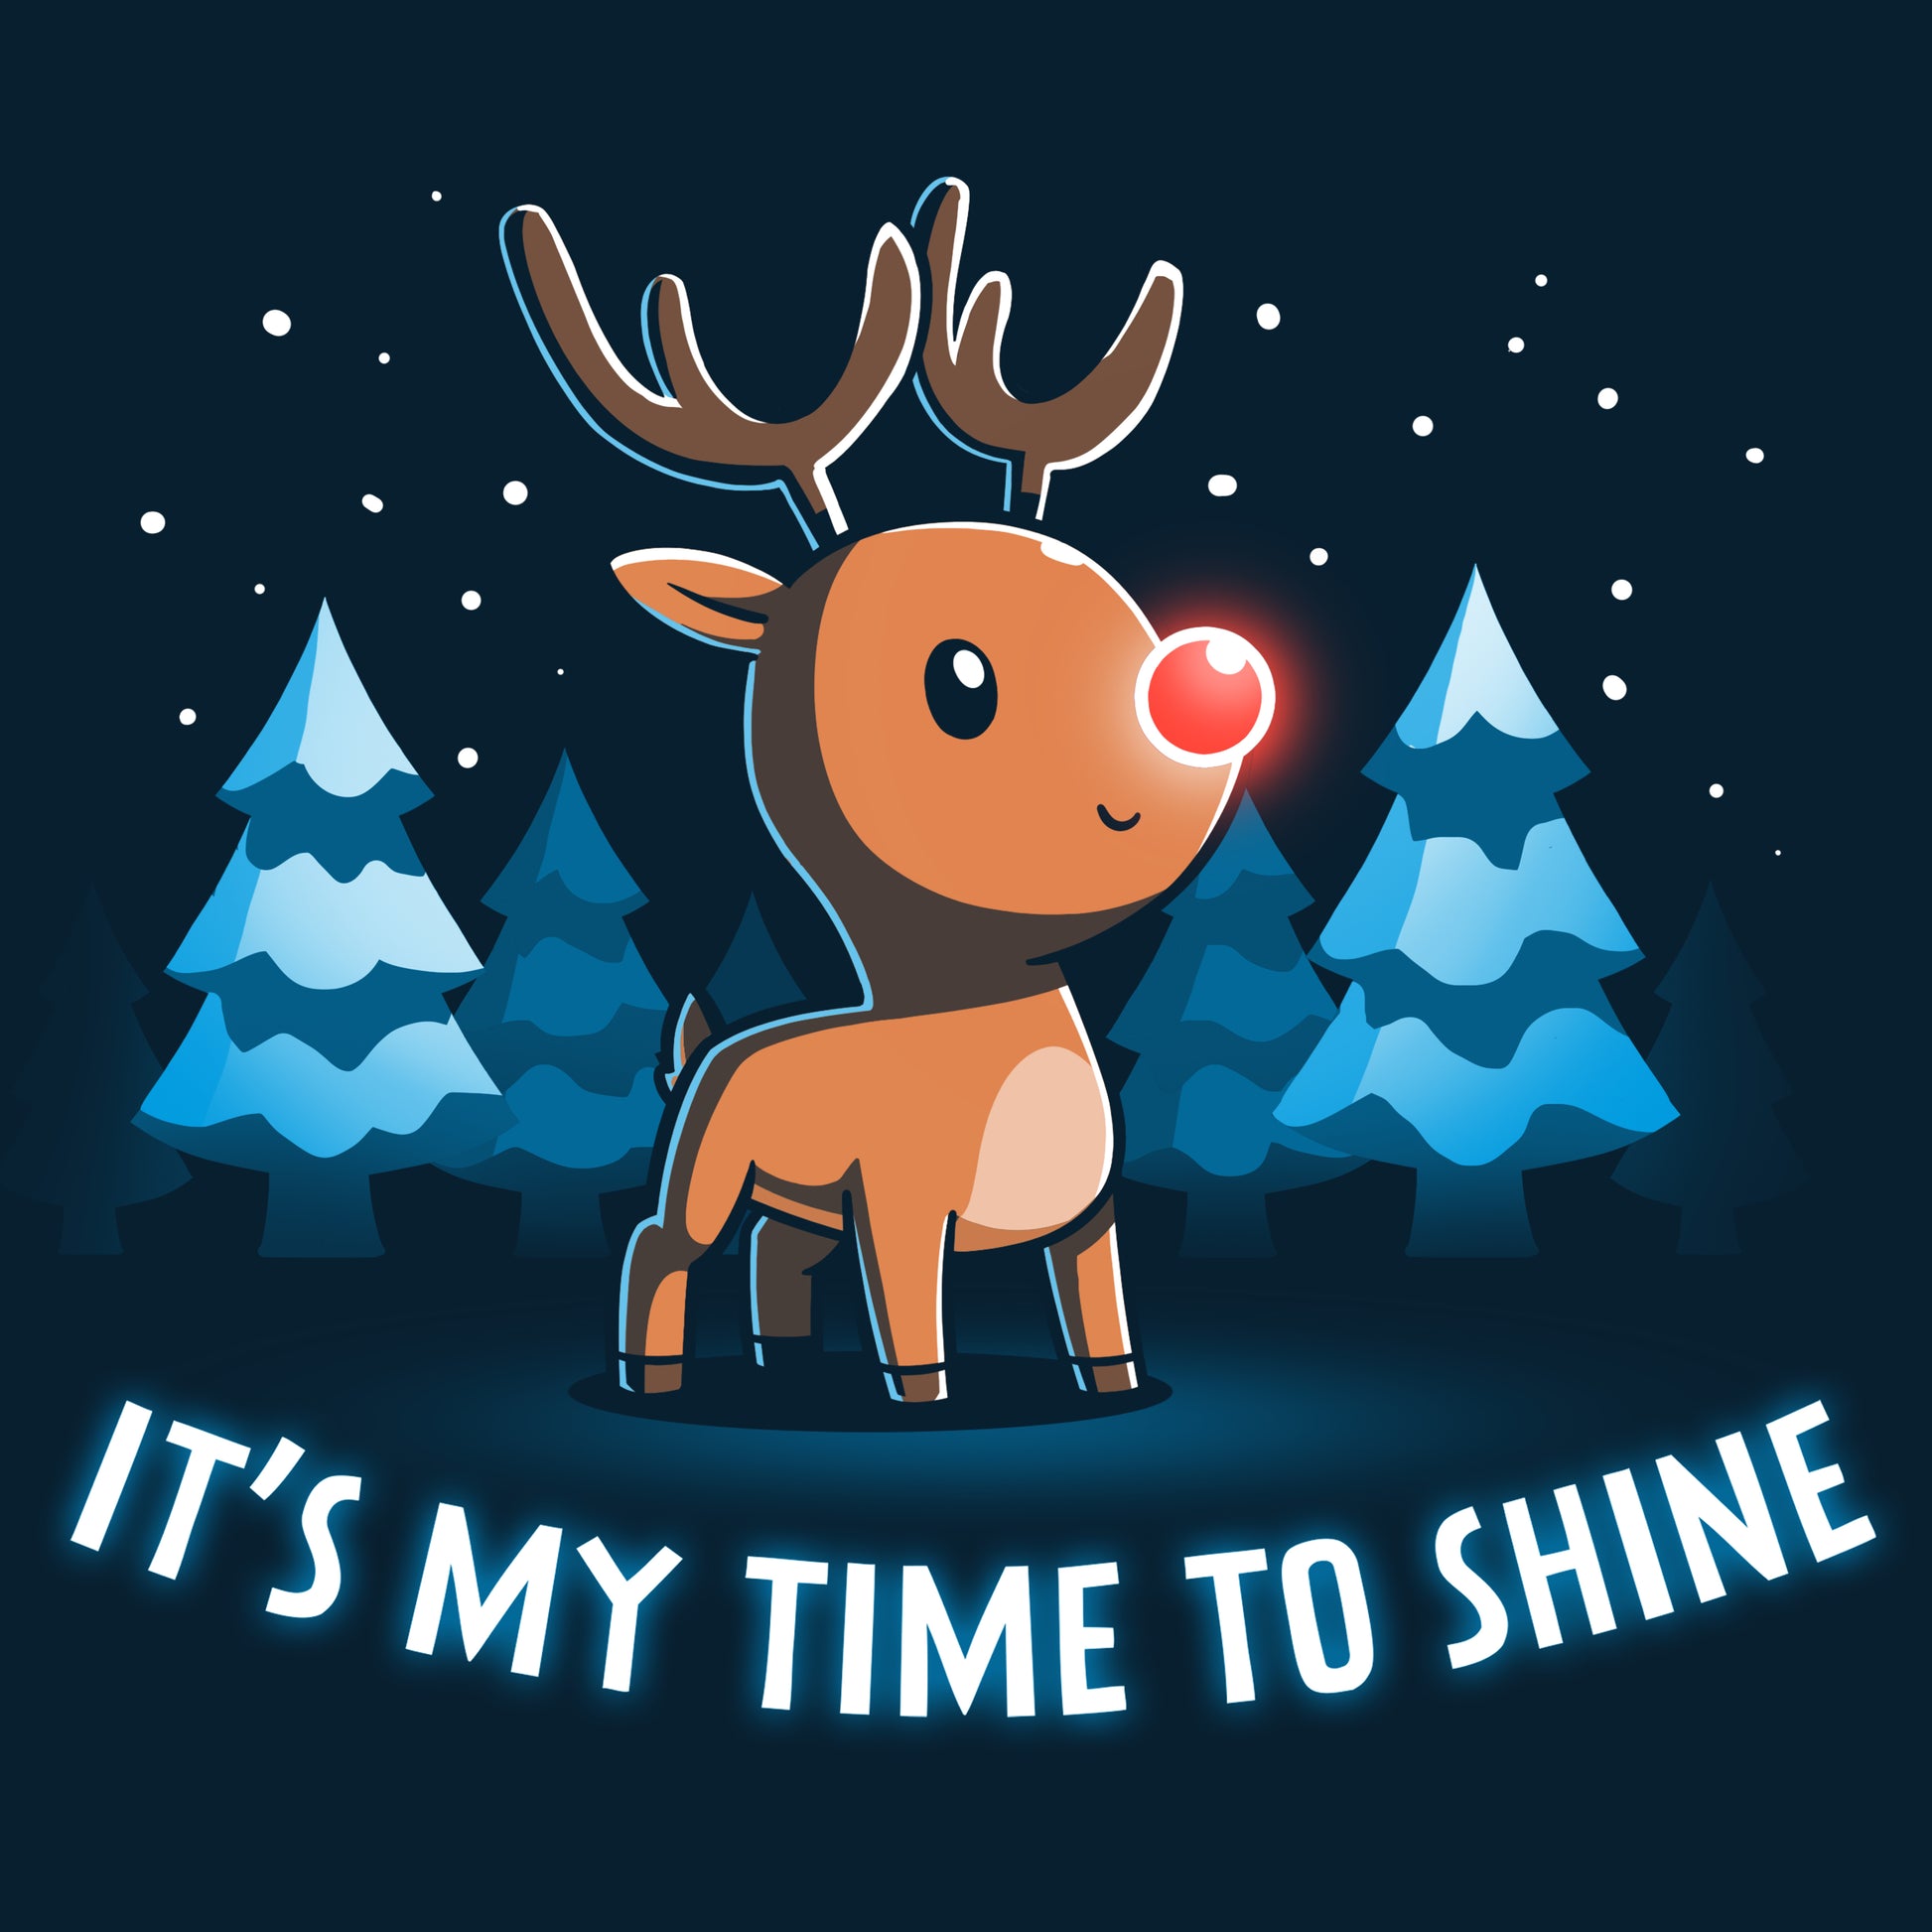 A reindeer with the words "It's My Time To Shine" printed on a TeeTurtle t-shirt.